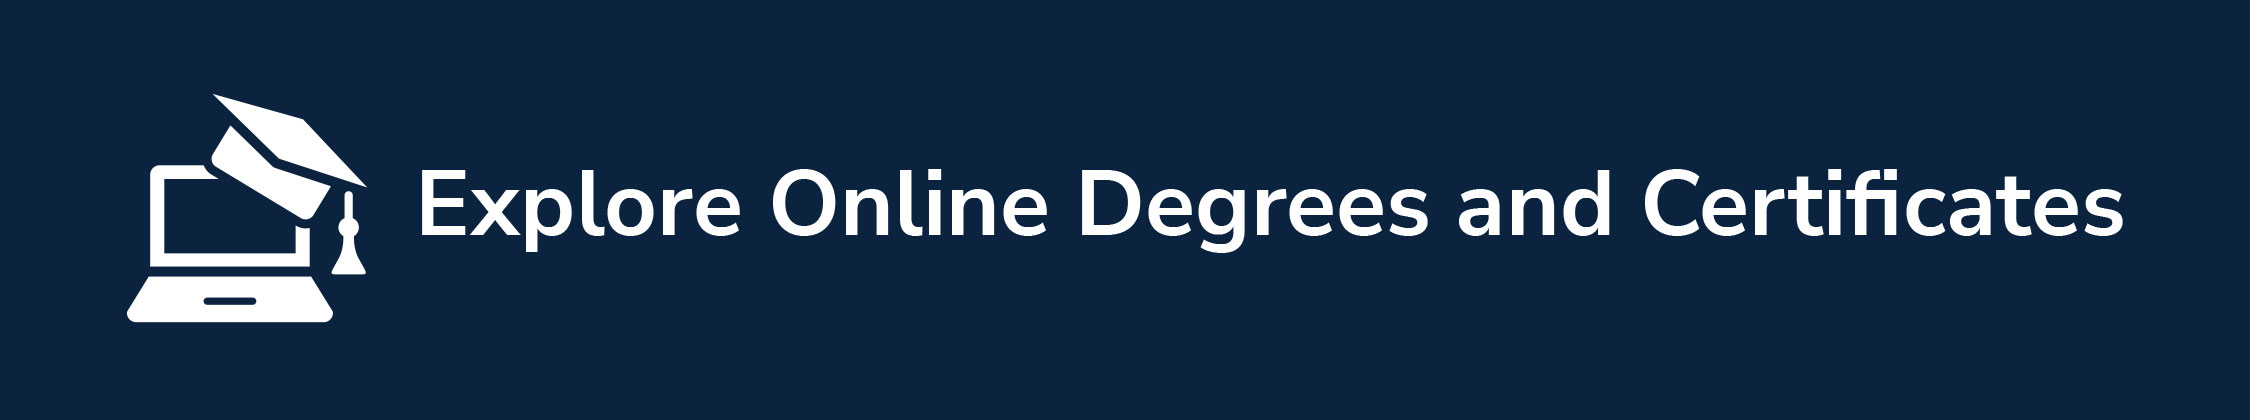 Explore Online Degrees and Certificates